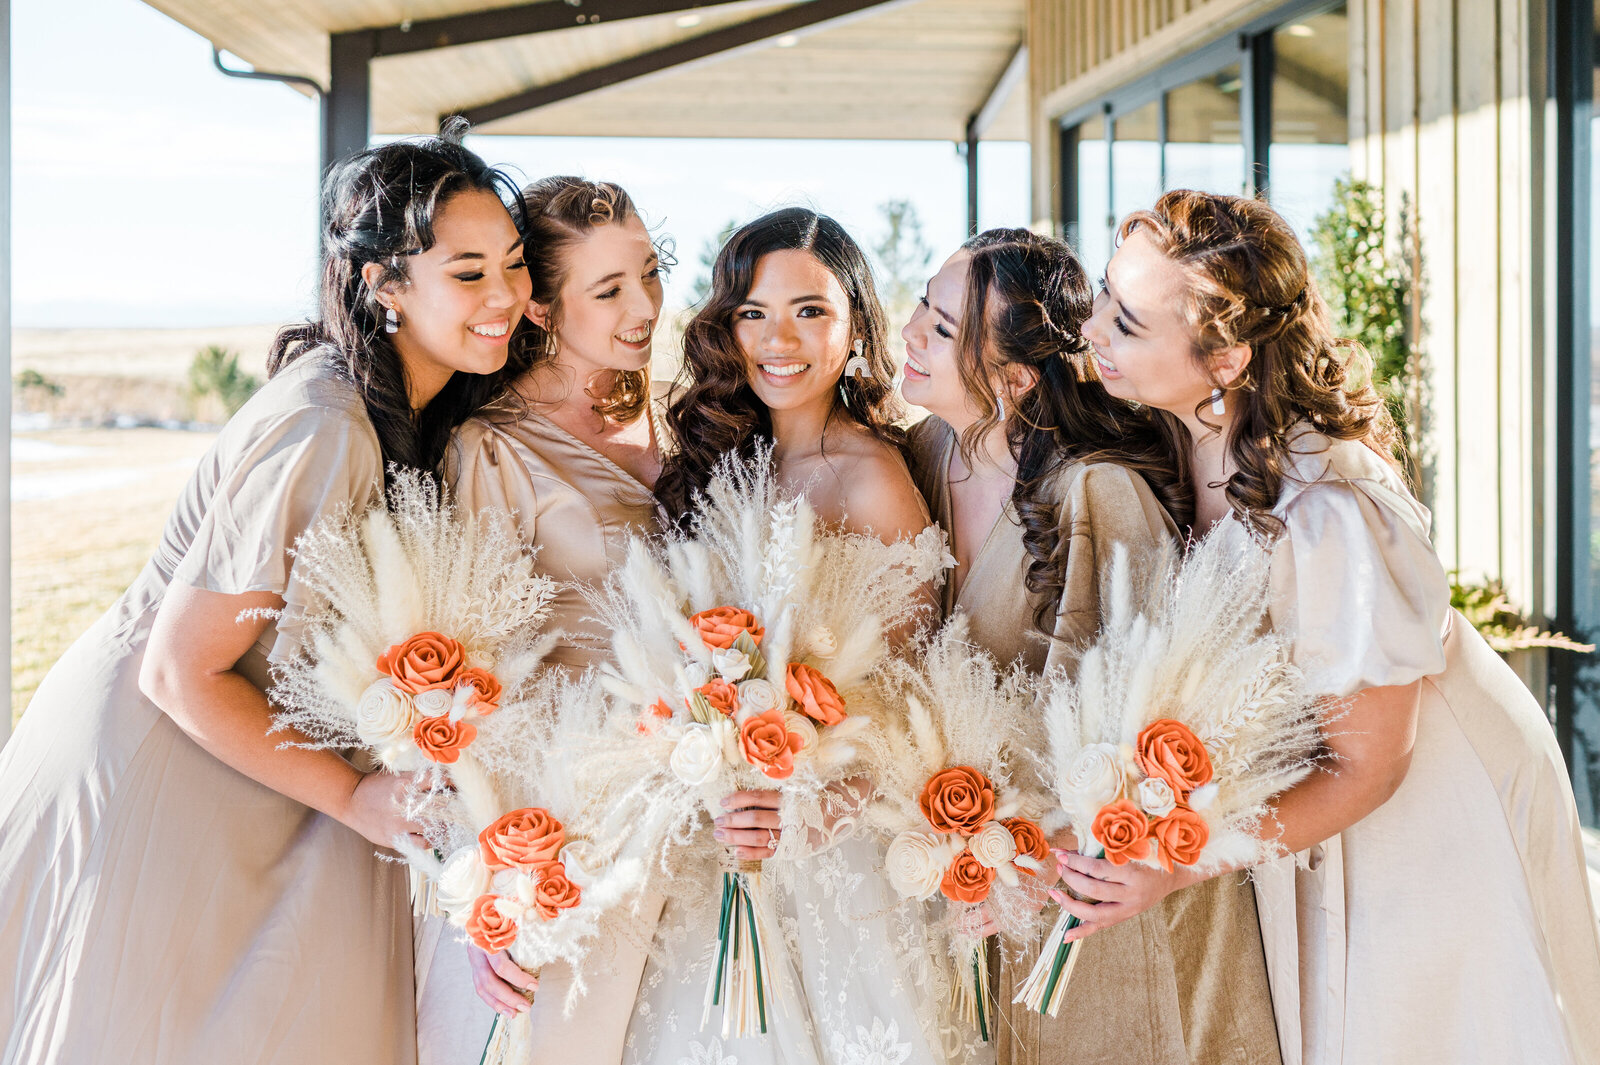 Bridal Party smiling together